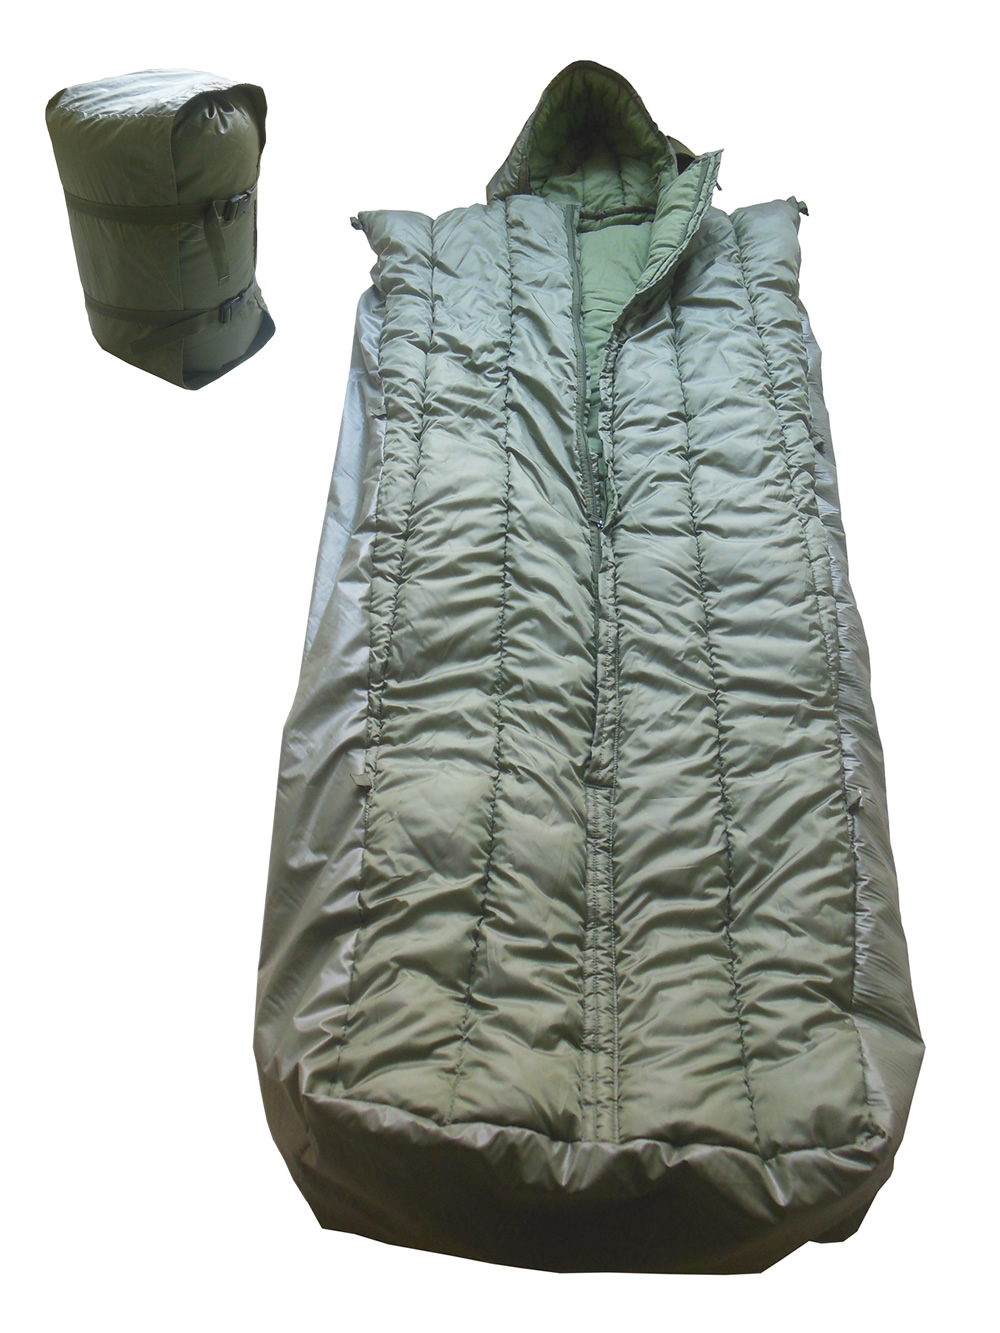 High Quality Army Sleeping Bags for Mummy Style